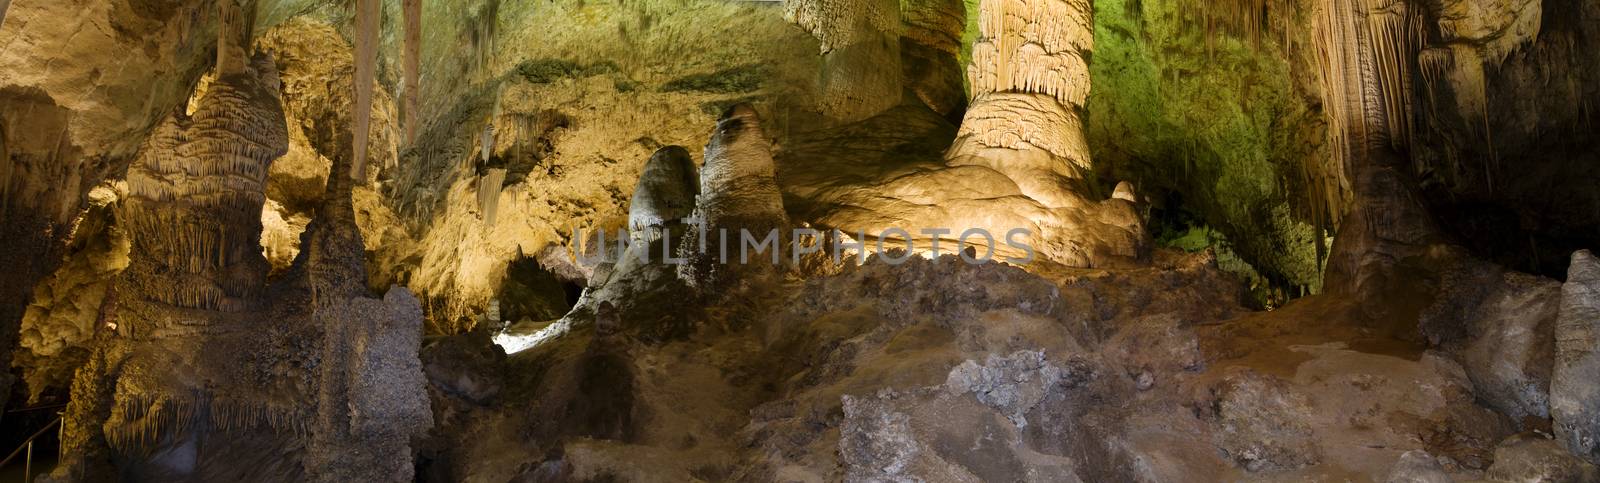 Hall of Giants, Carlsbad Caverns, NM